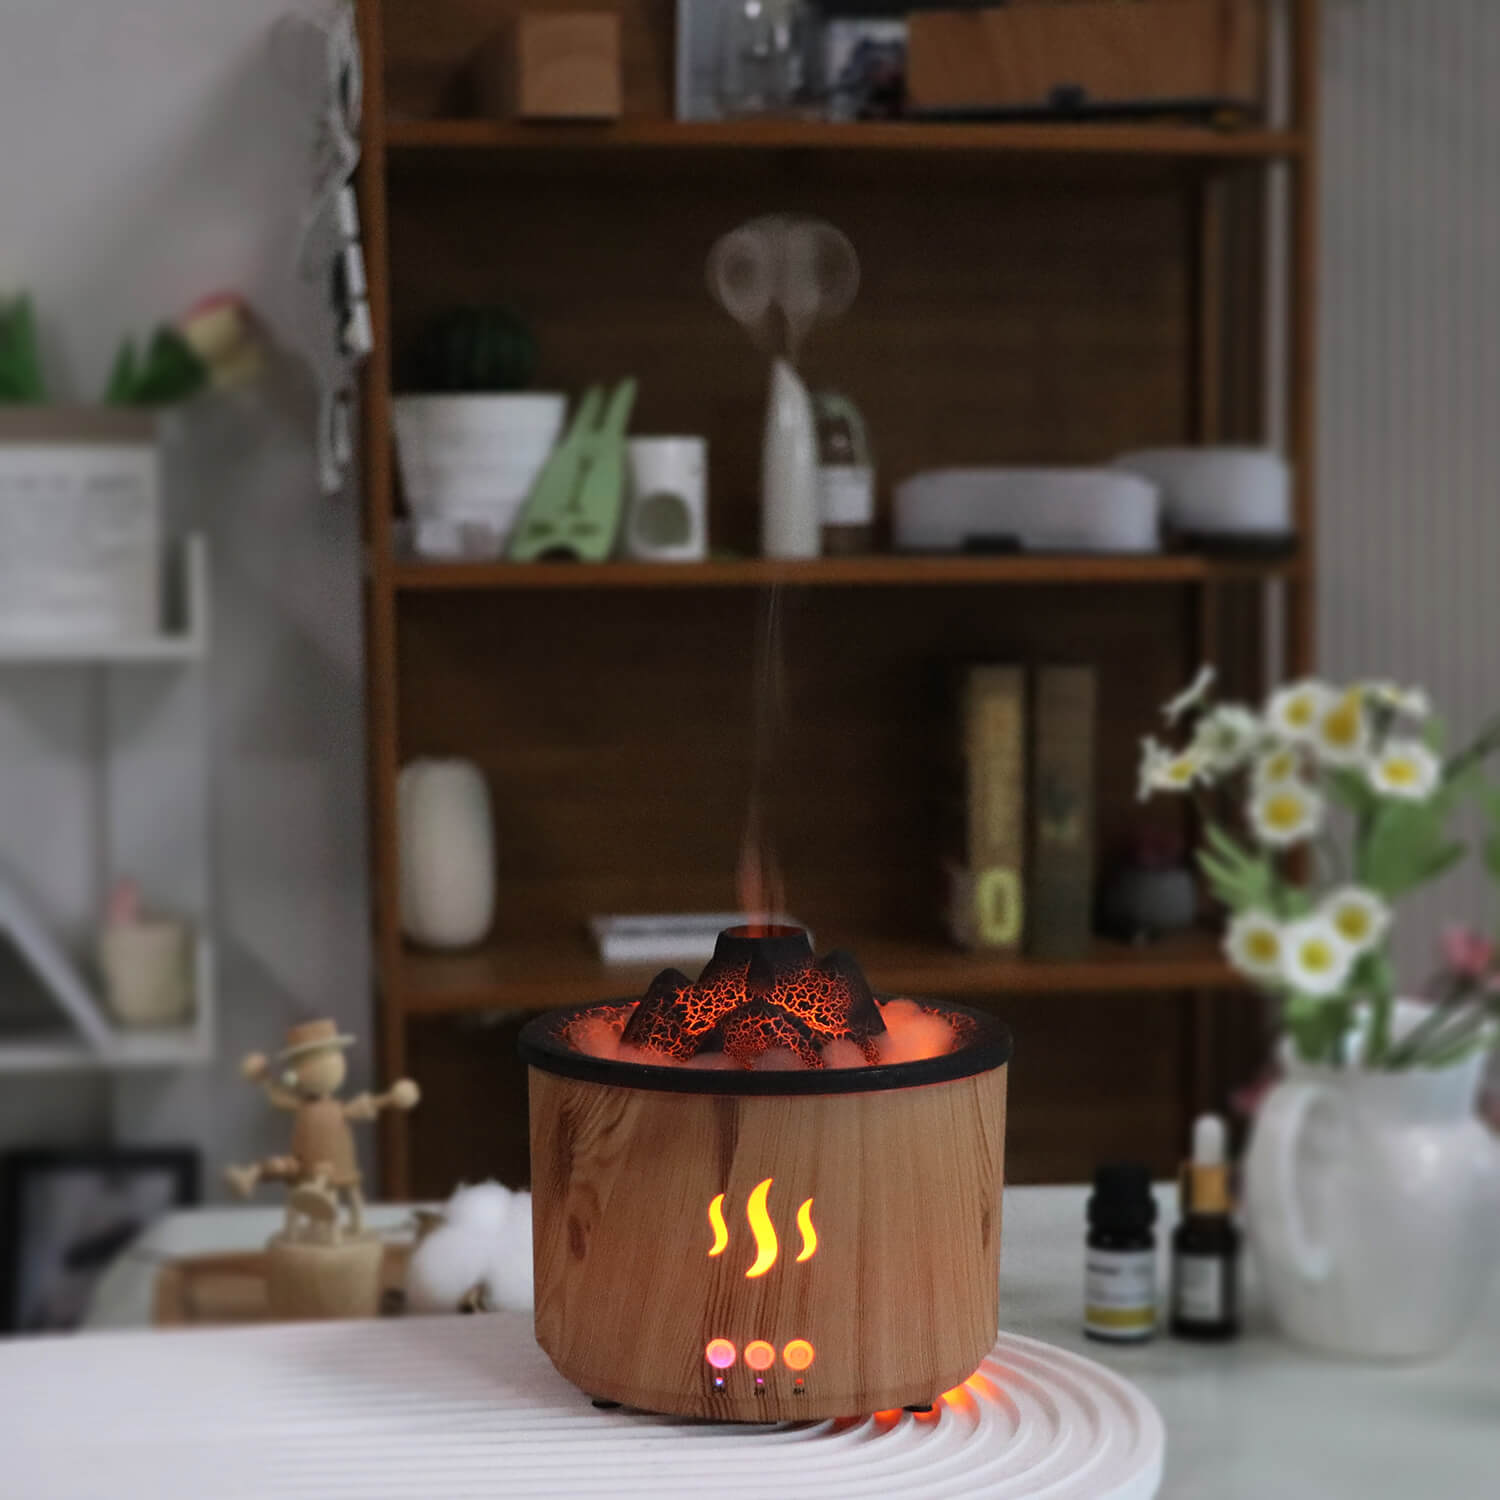 Explore the unique design and functionality of our Volcano Aroma Humidifier from different angles.